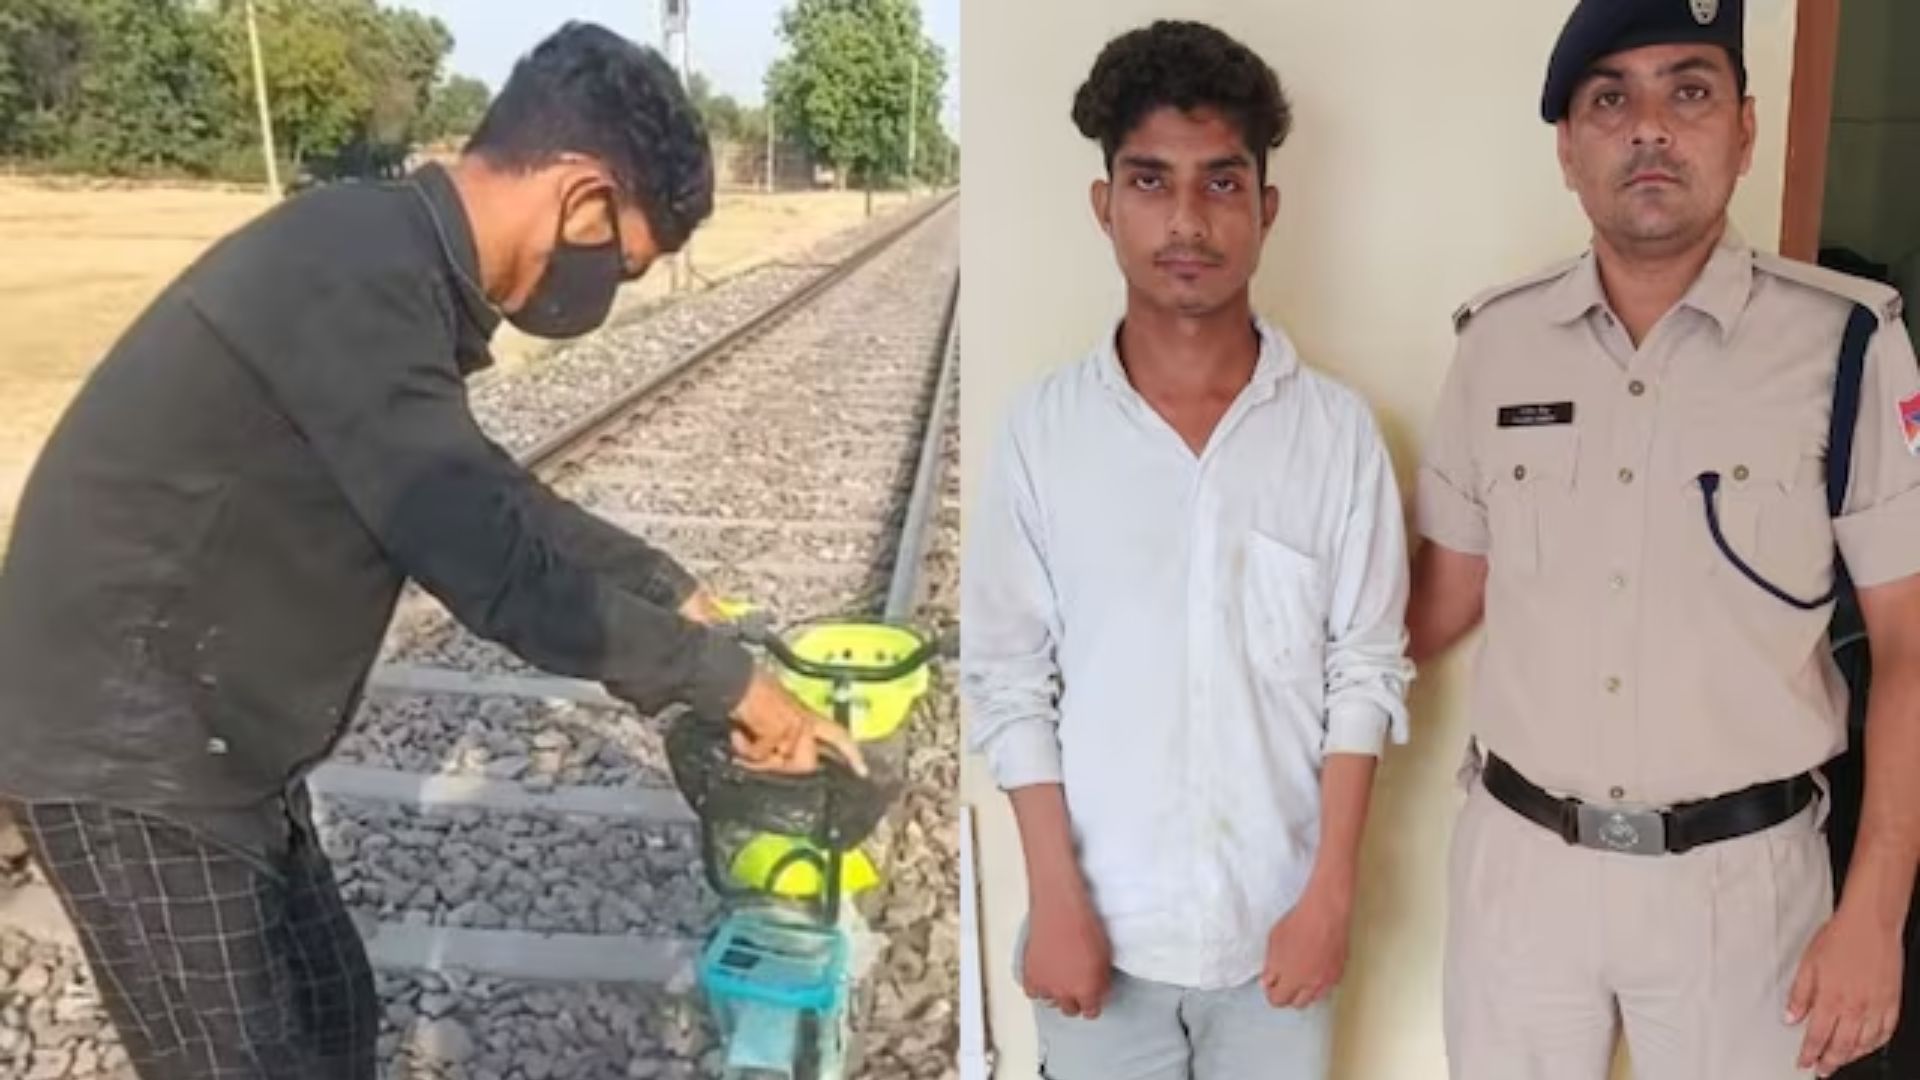 Who Is Gulzar Sheikh? YouTuber Who Kept Objects On Railway Tracks ARRESTED